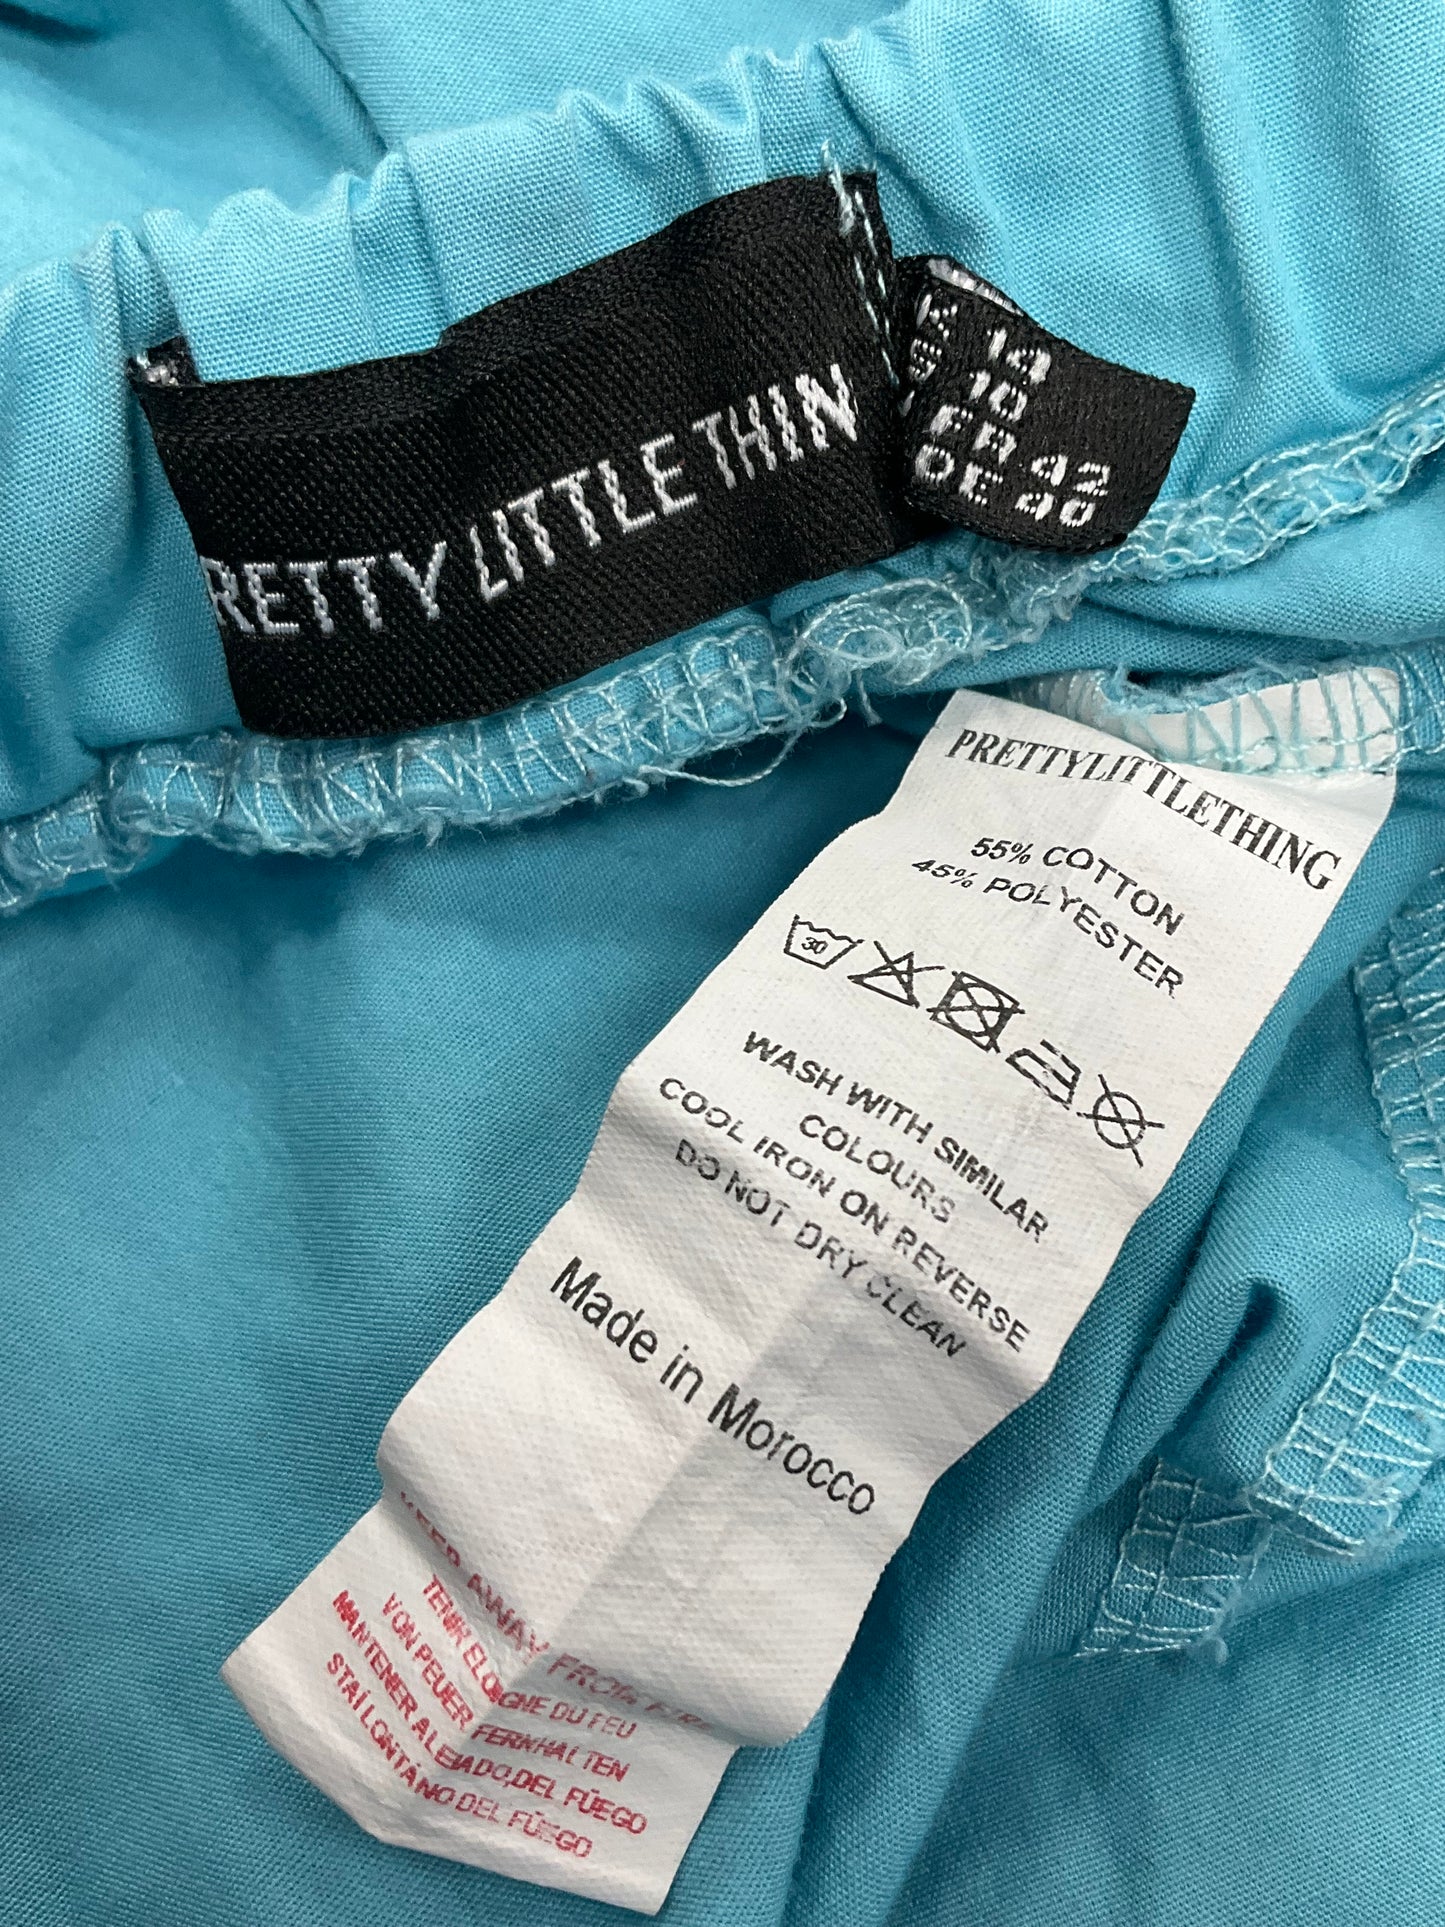 Shorts By Pretty Little Thing  Size: 10